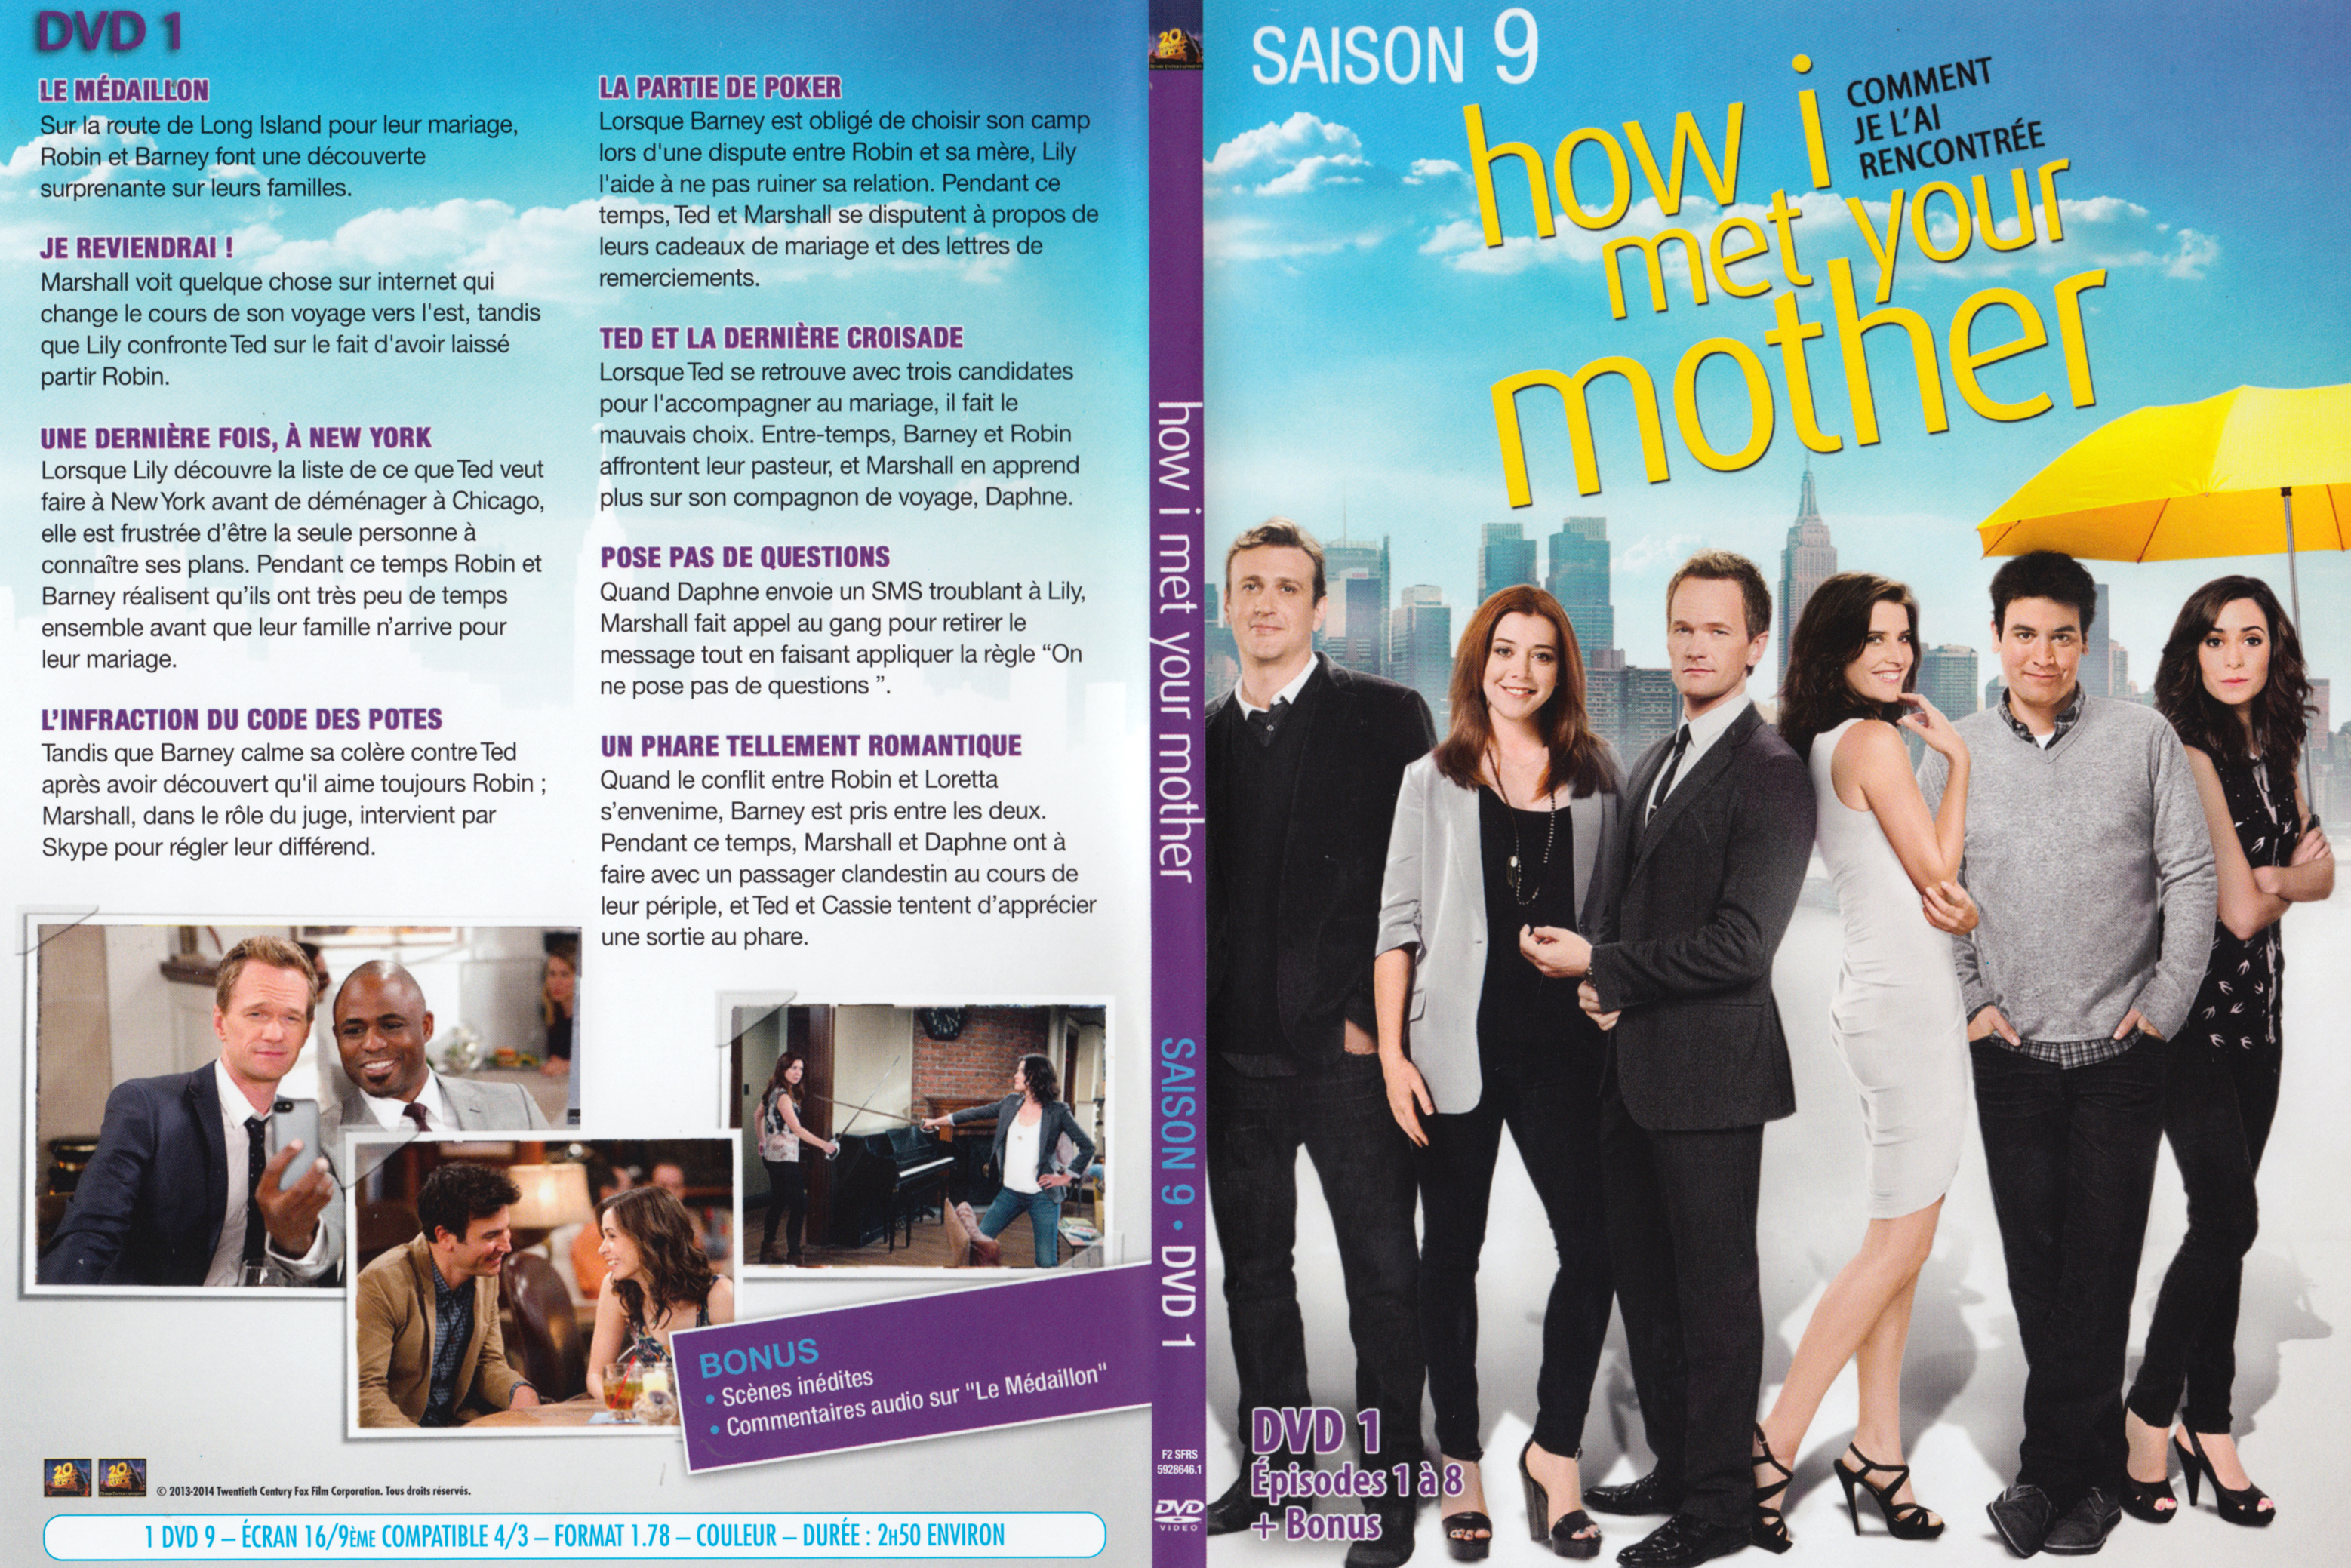 Jaquette DVD How i met your mother Saison 9 DVD 1